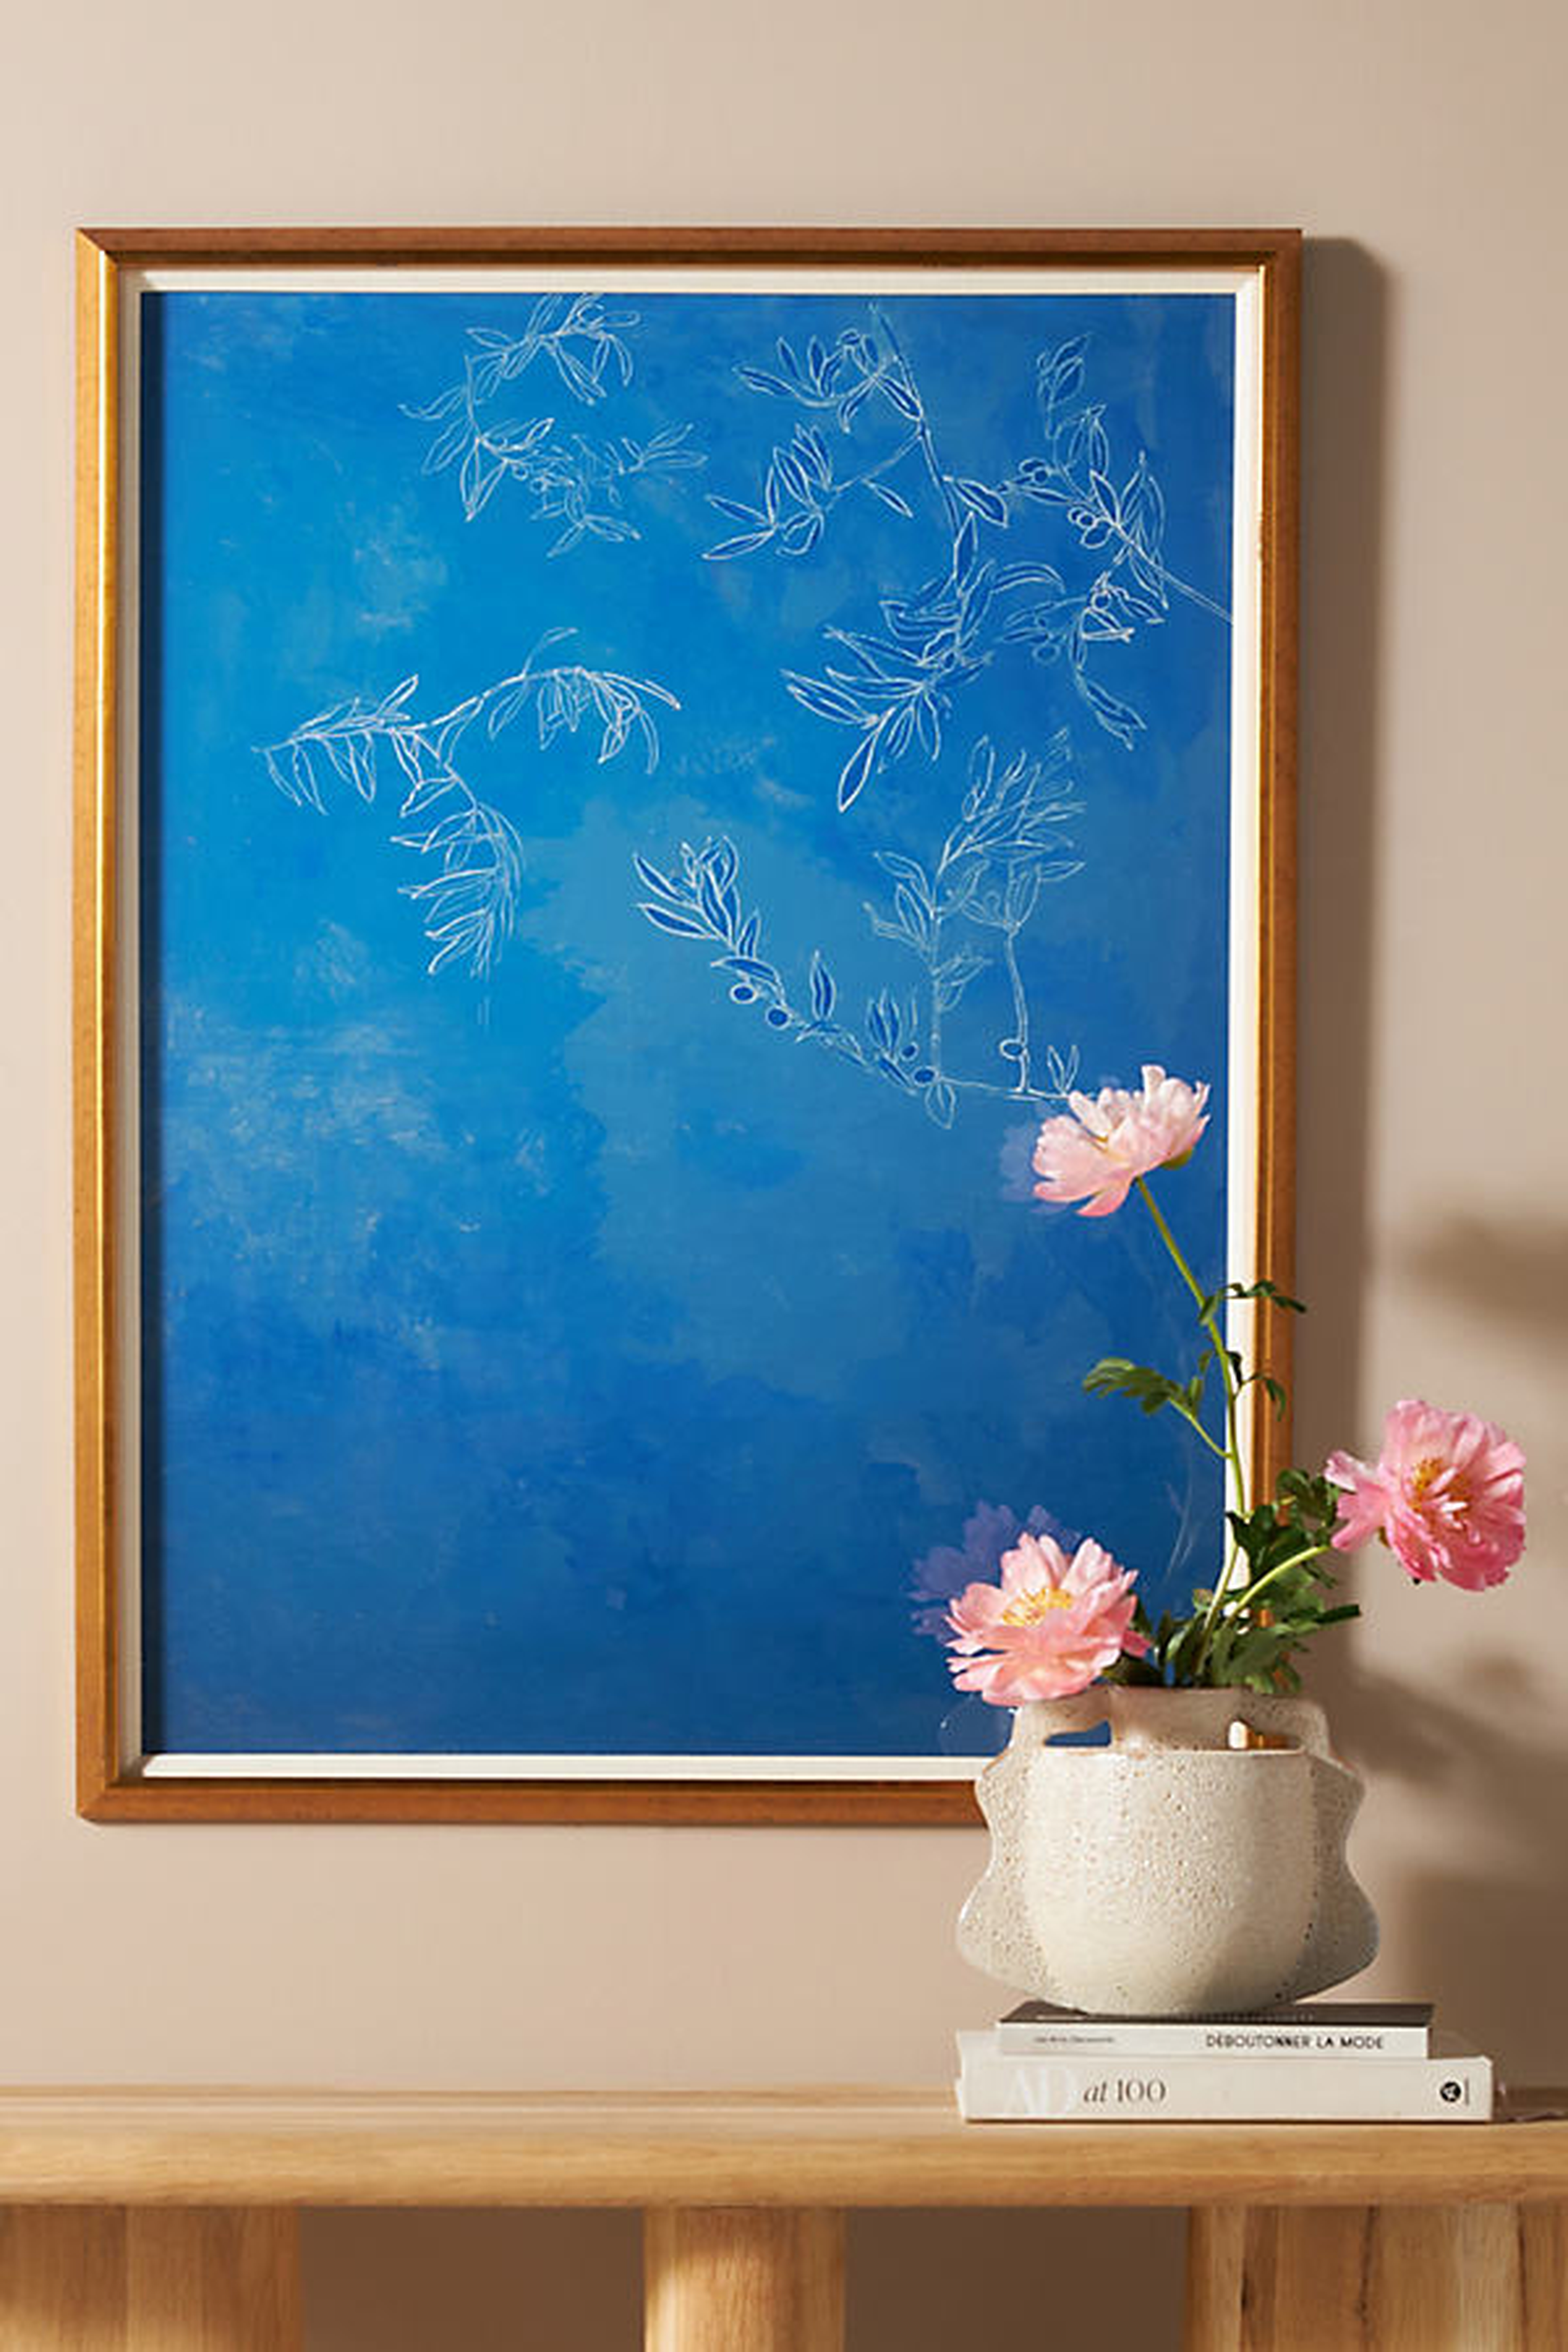 Offer An Olive Branch Wall Art By Isabelle de Borchgrave for Soicher Marin in Blue - Anthropologie